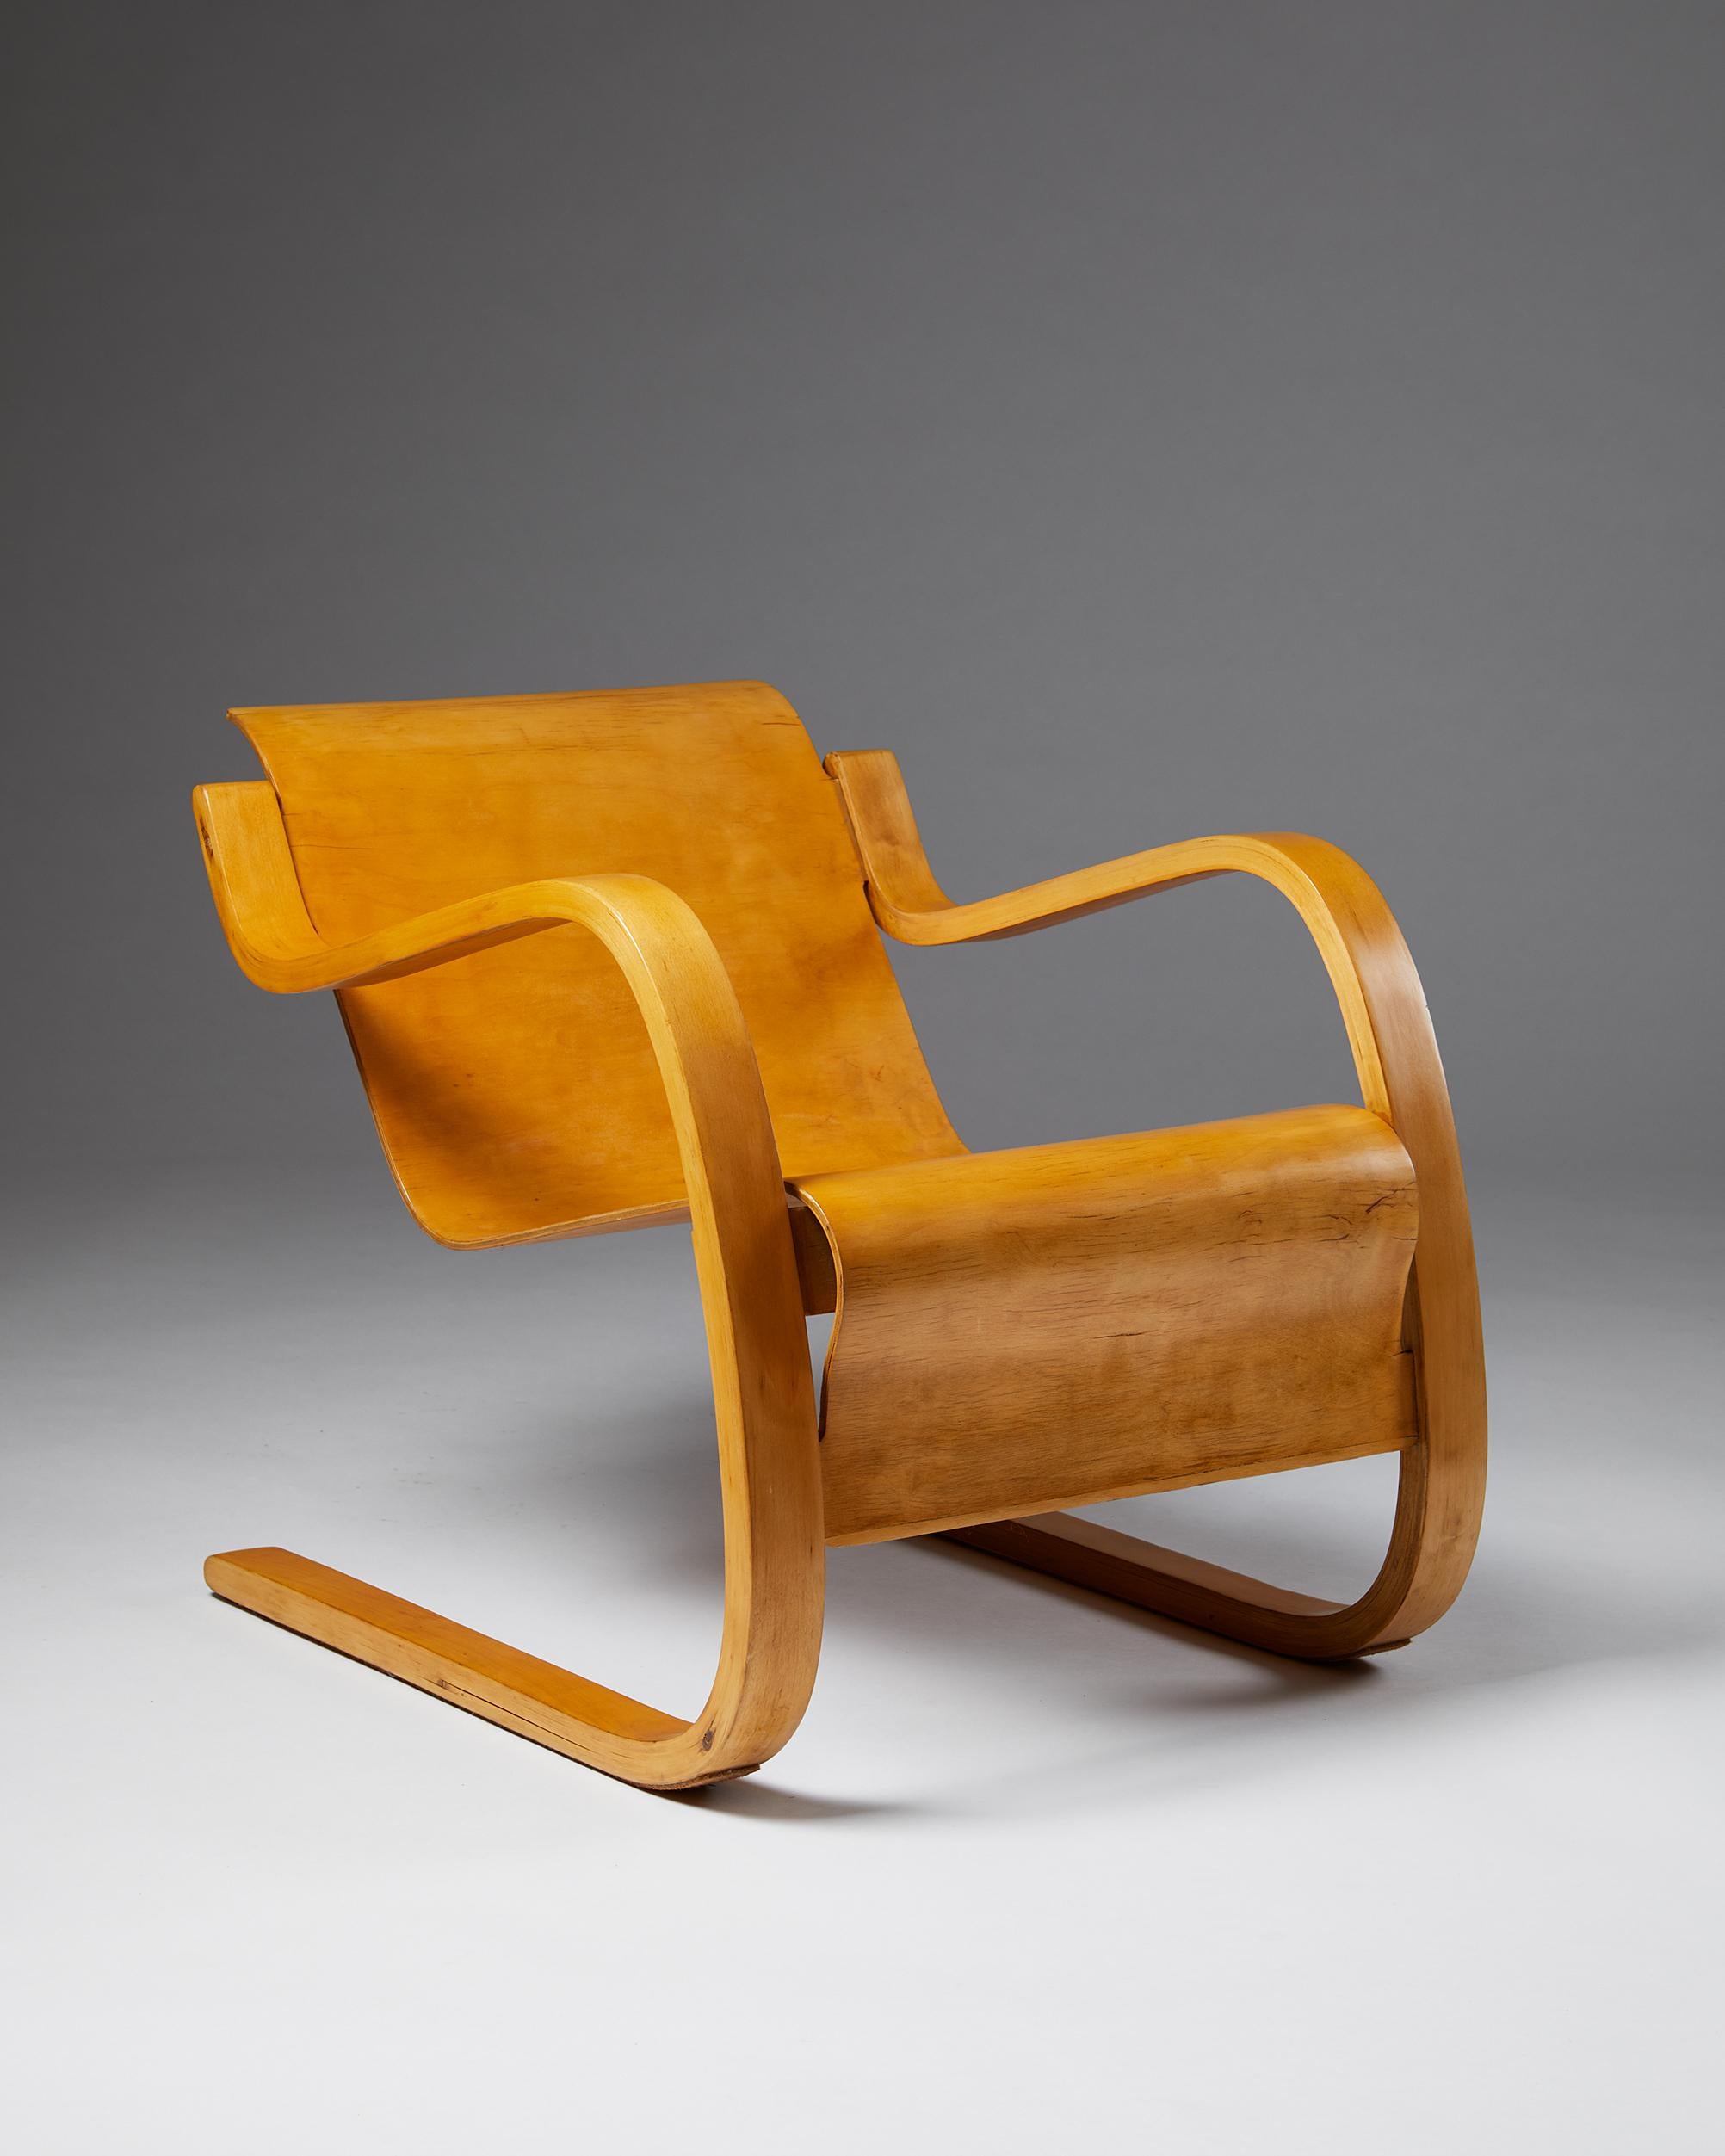 Armchair 42 “Small Paimio” designed by Alvar Aalto,
Finland, 1931.

Bent birch and lacquered plywood.

Dimesnions:
H: 63 cm/ 2' 1